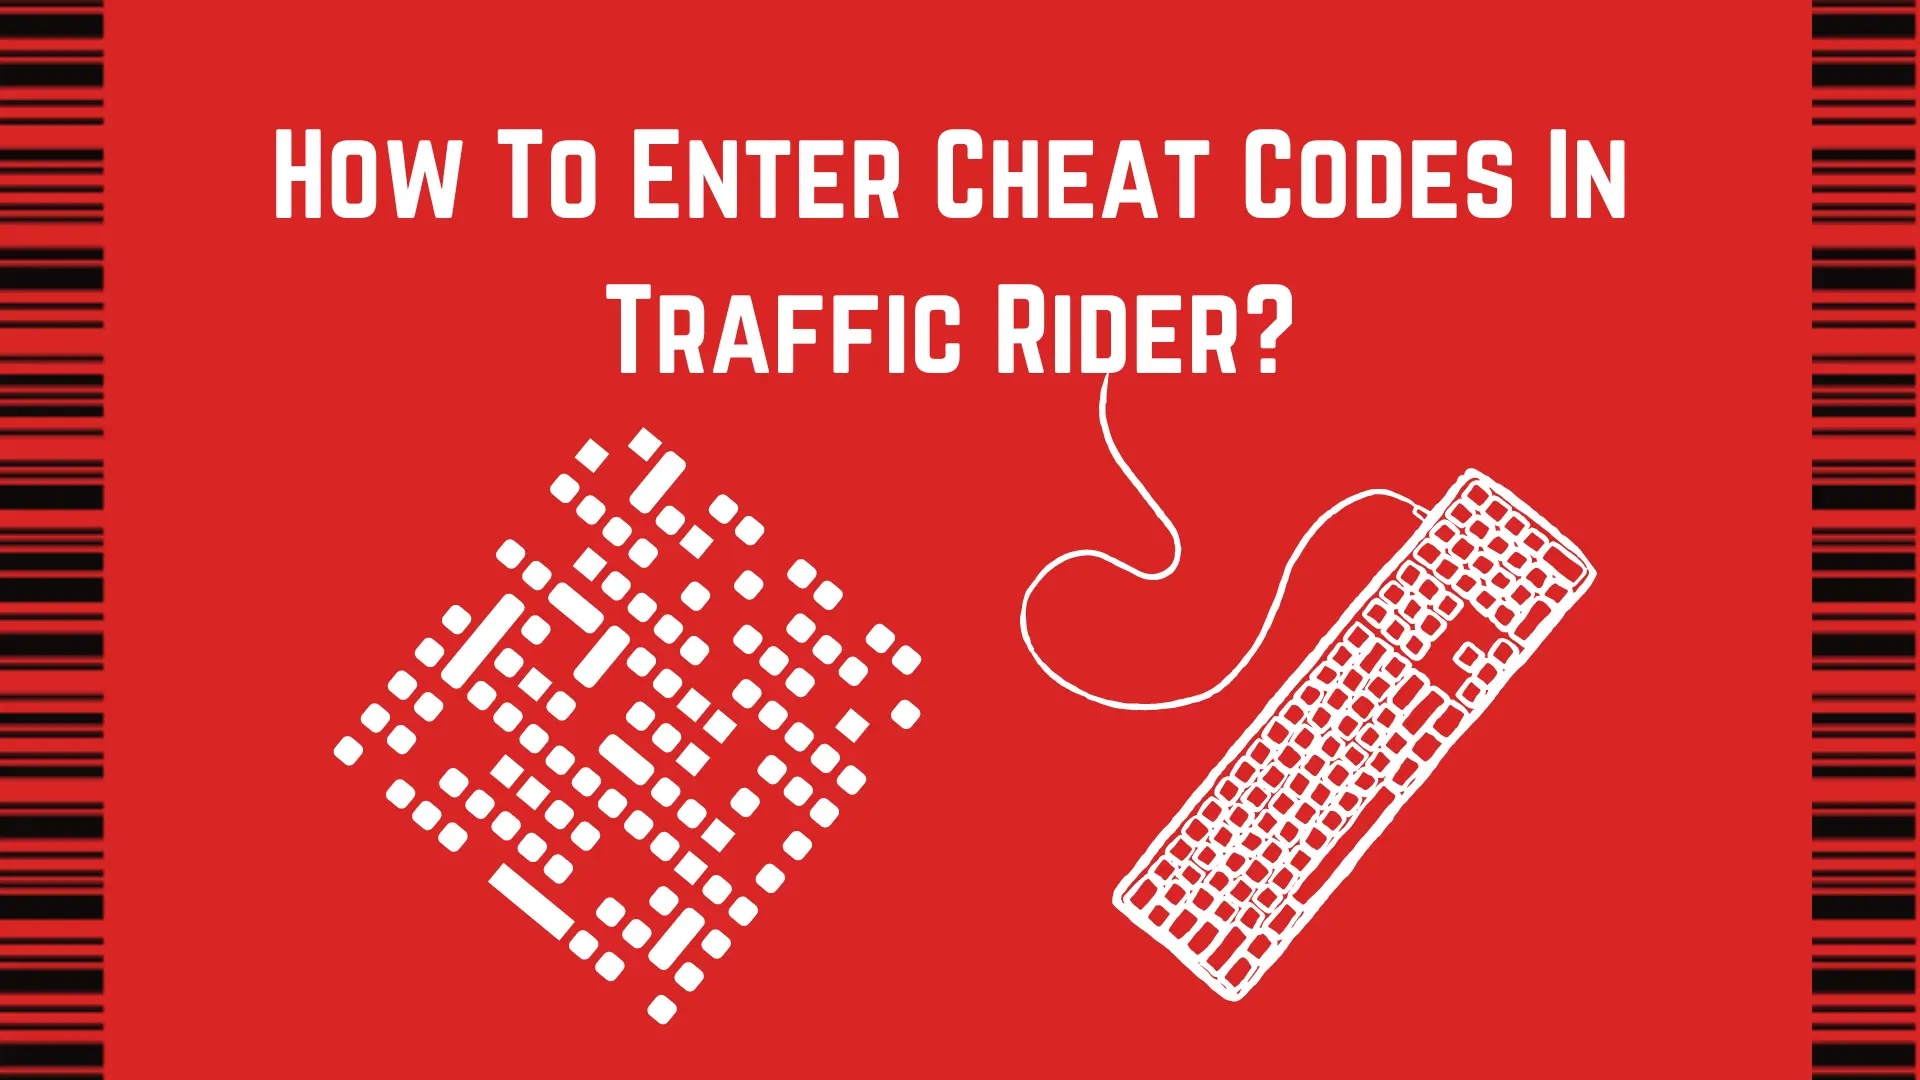 How To Enter Cheat Codes In Traffic Rider